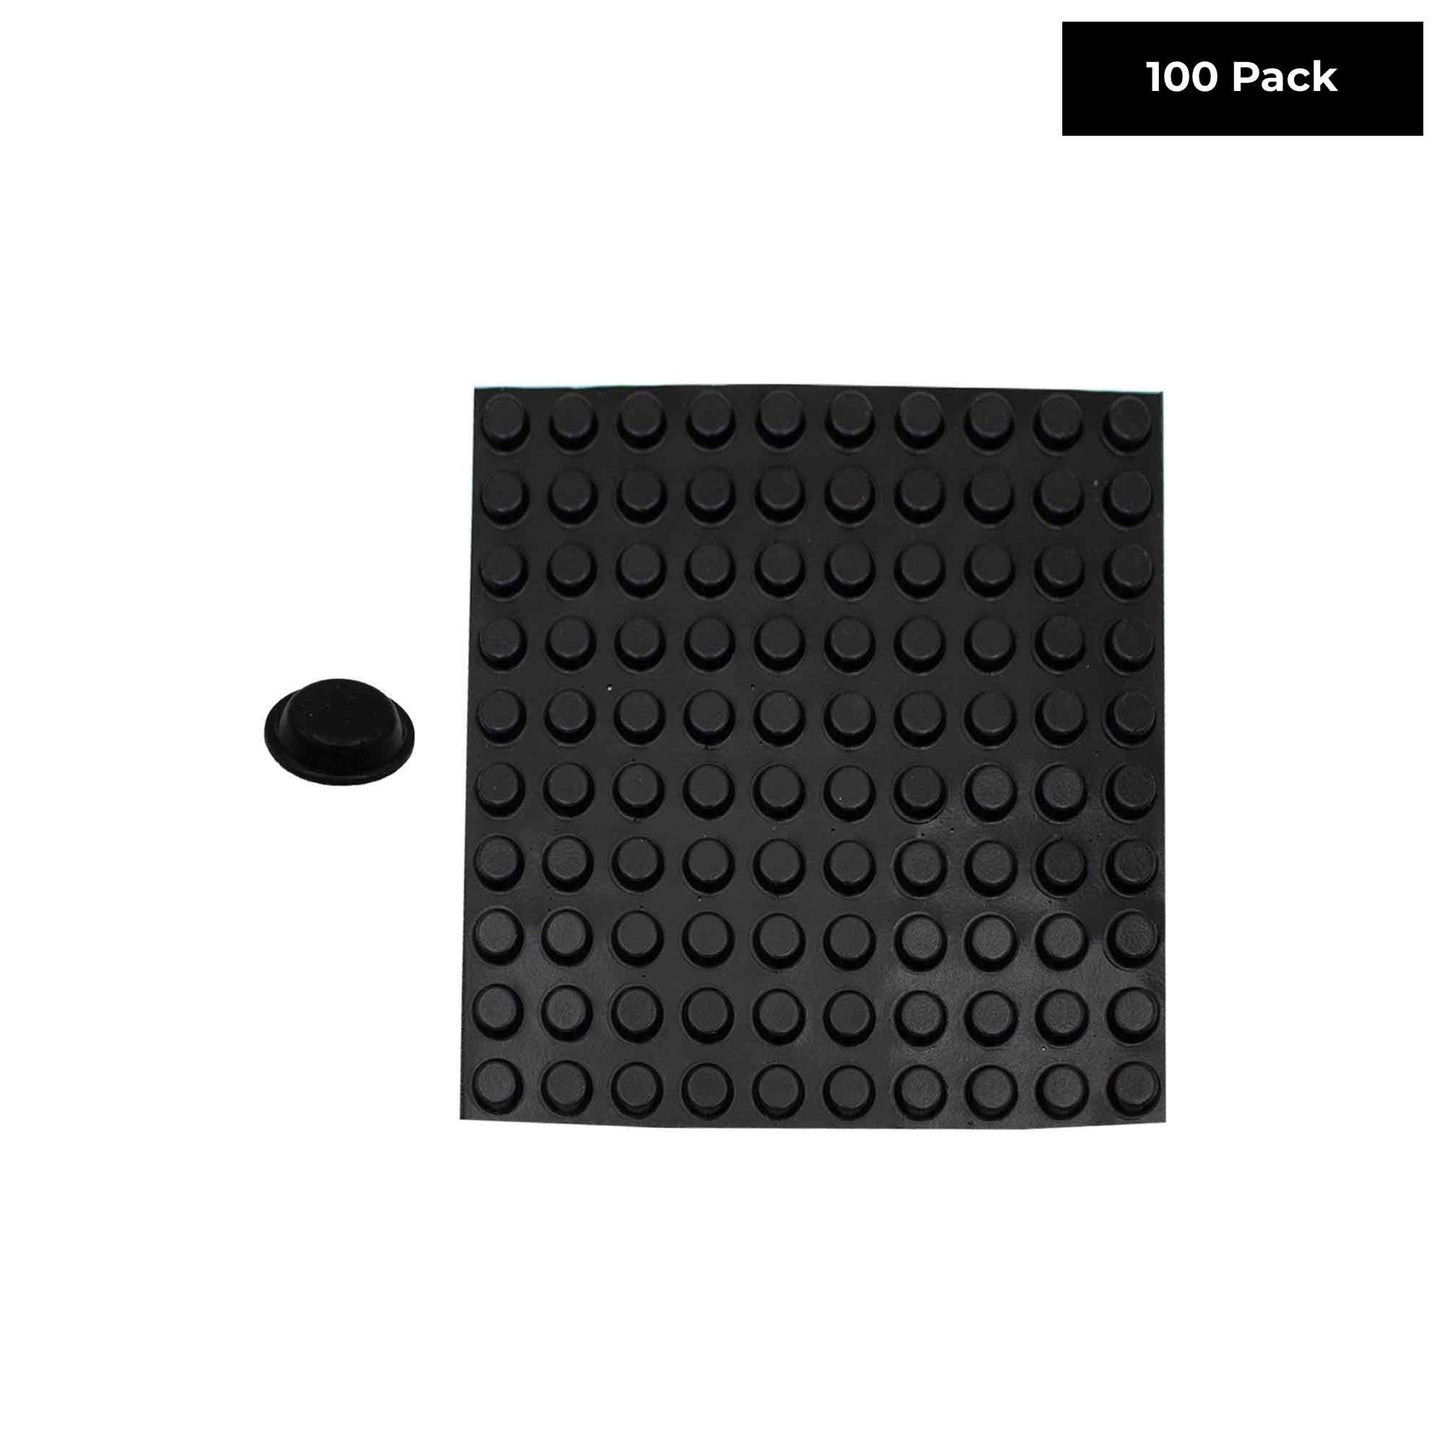 Self Stick Black Silicone Protective Wall Bumpers